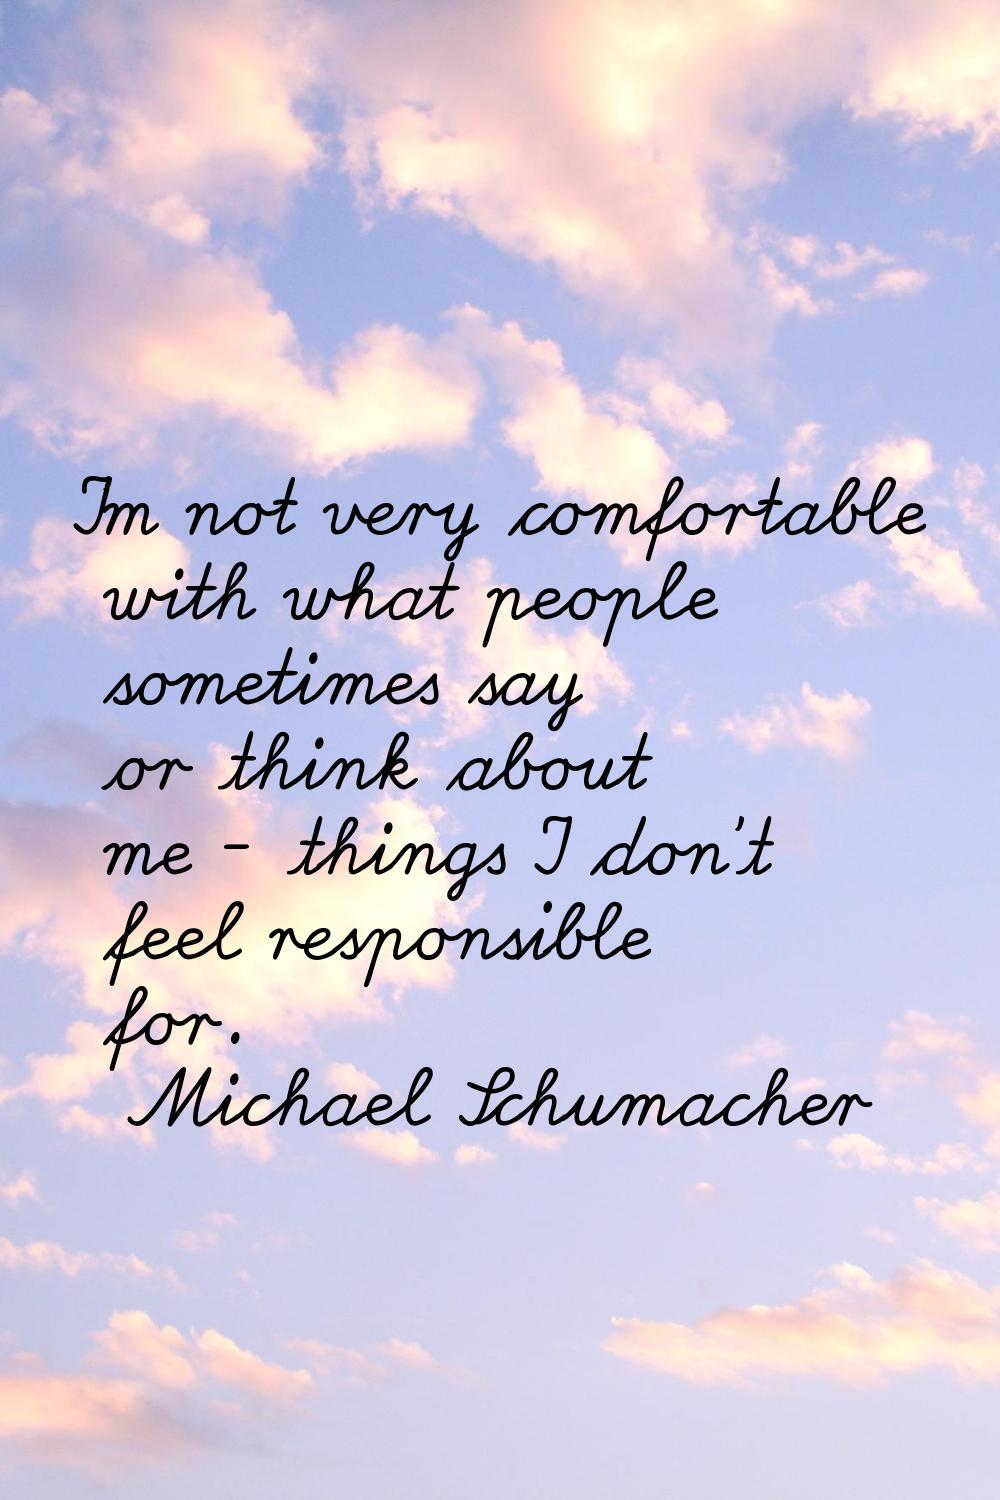 I'm not very comfortable with what people sometimes say or think about me - things I don't feel res